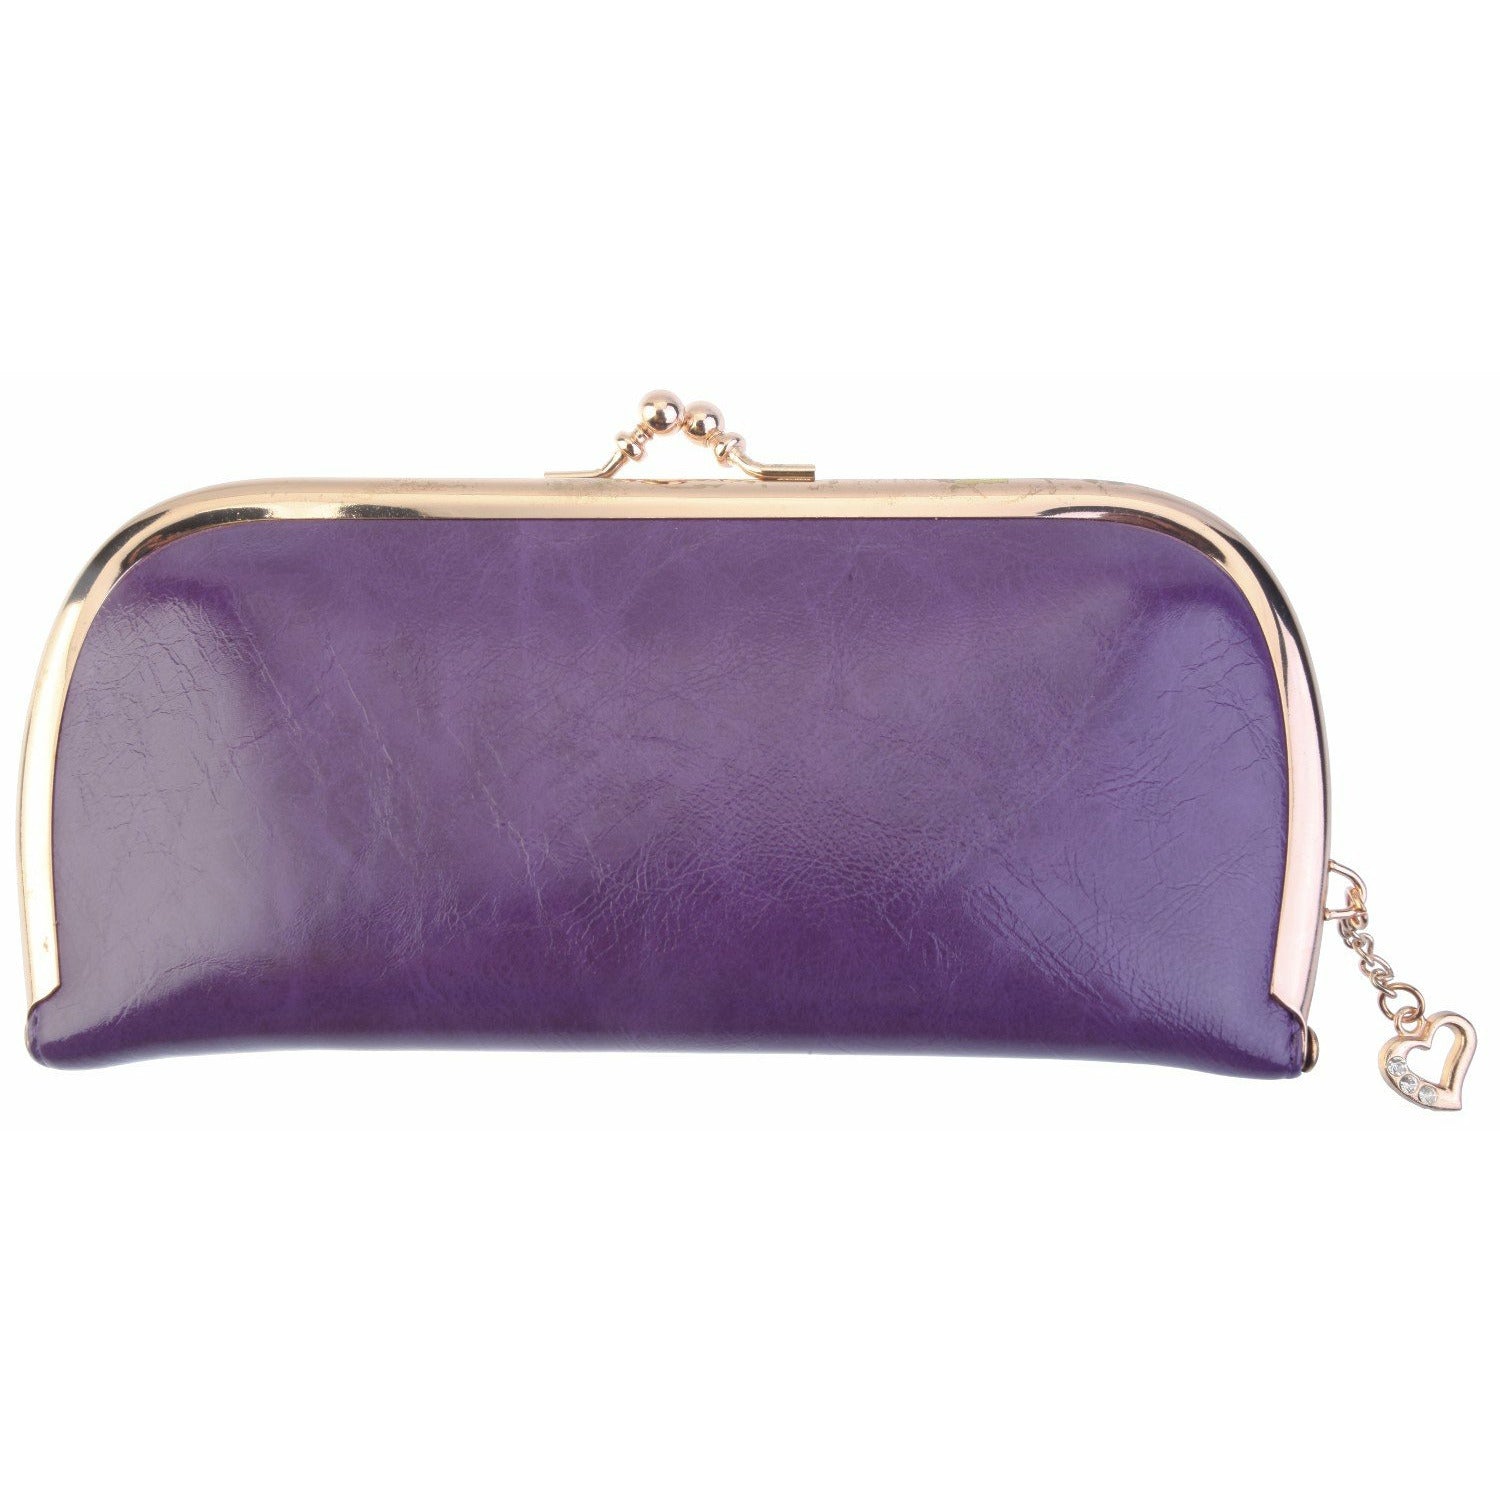 Polly wallet - Purple Not specified